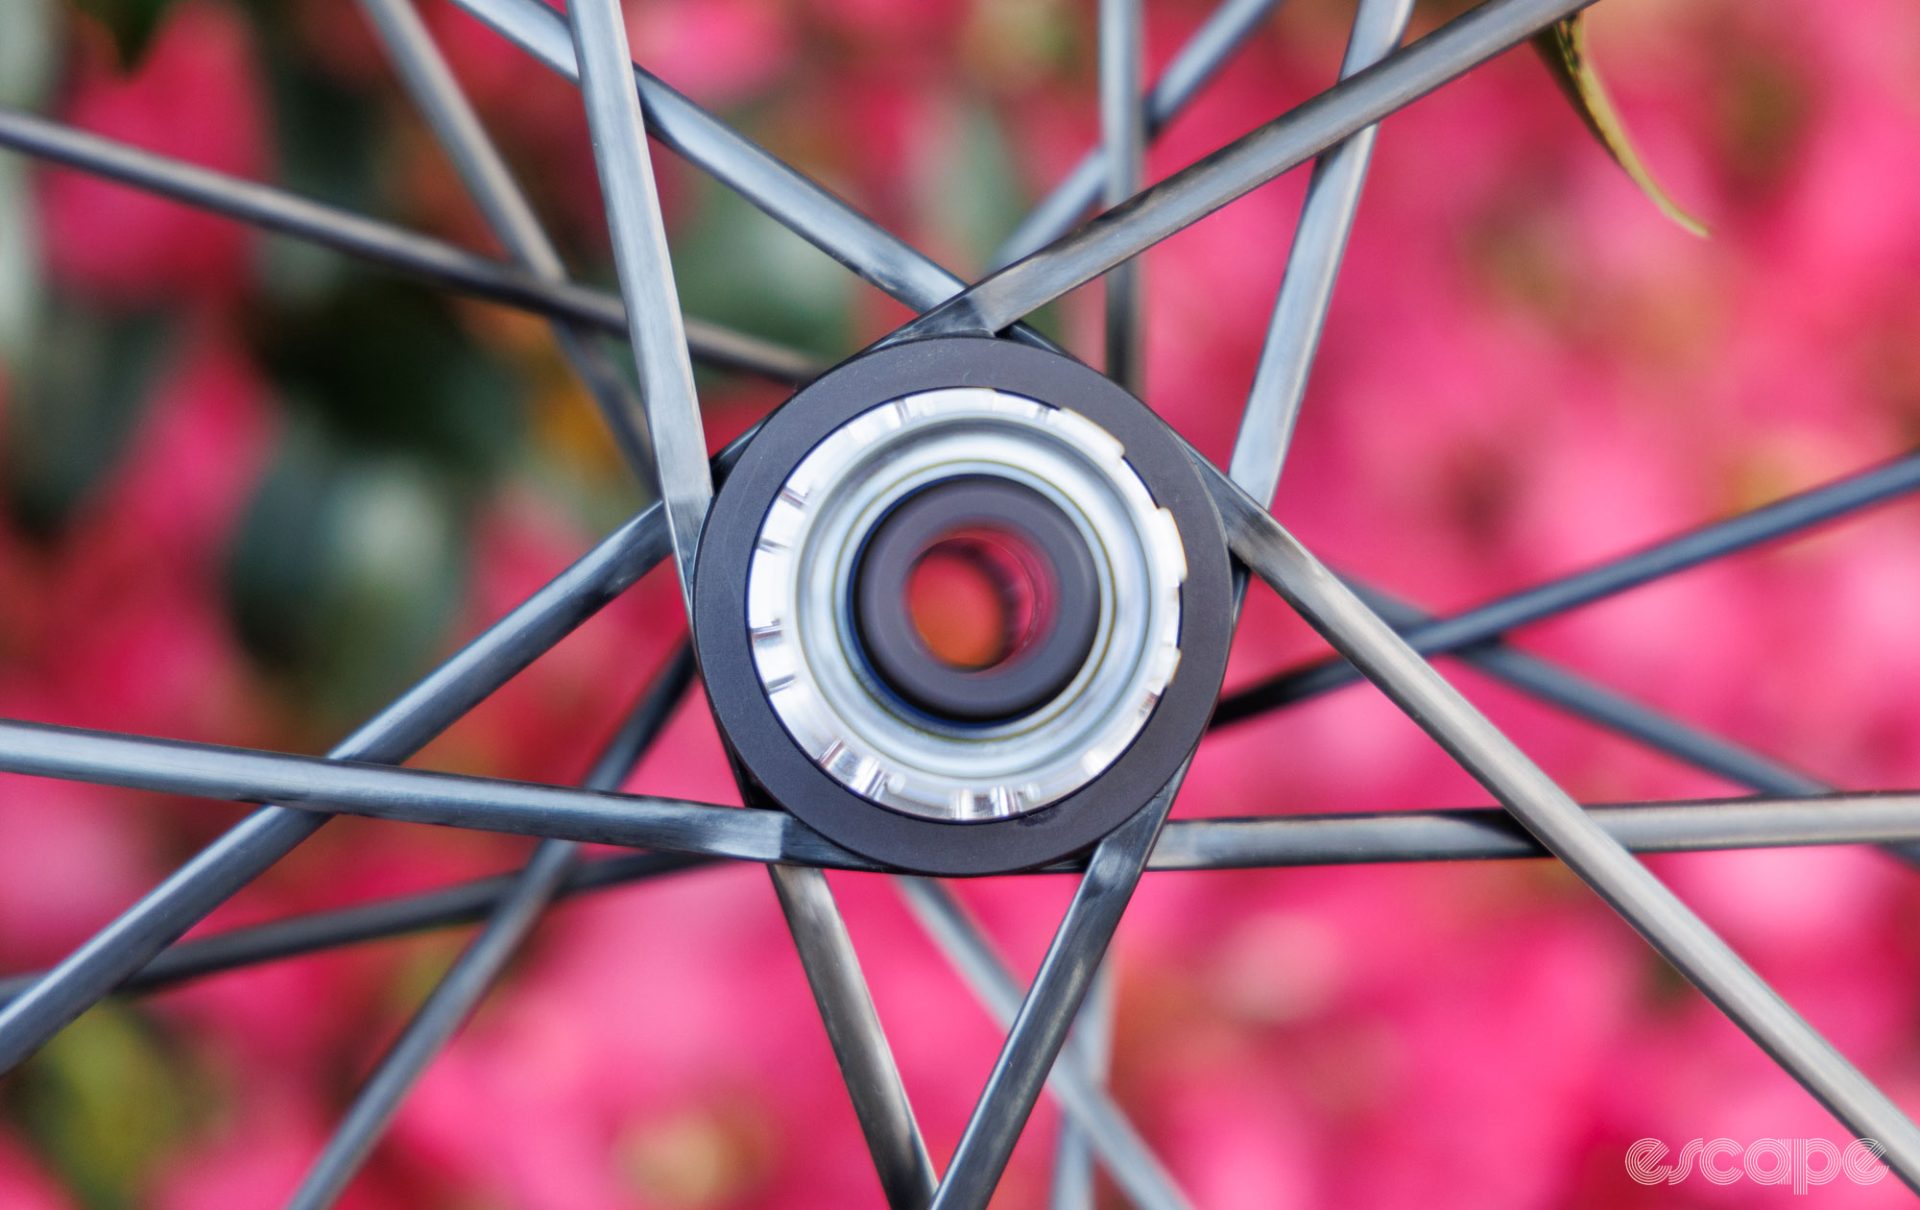 The Partington hub shell in closeup. The spokes wrap around the hub shell inside a flange, laying flush to the flange and overlapping each other as they exit.